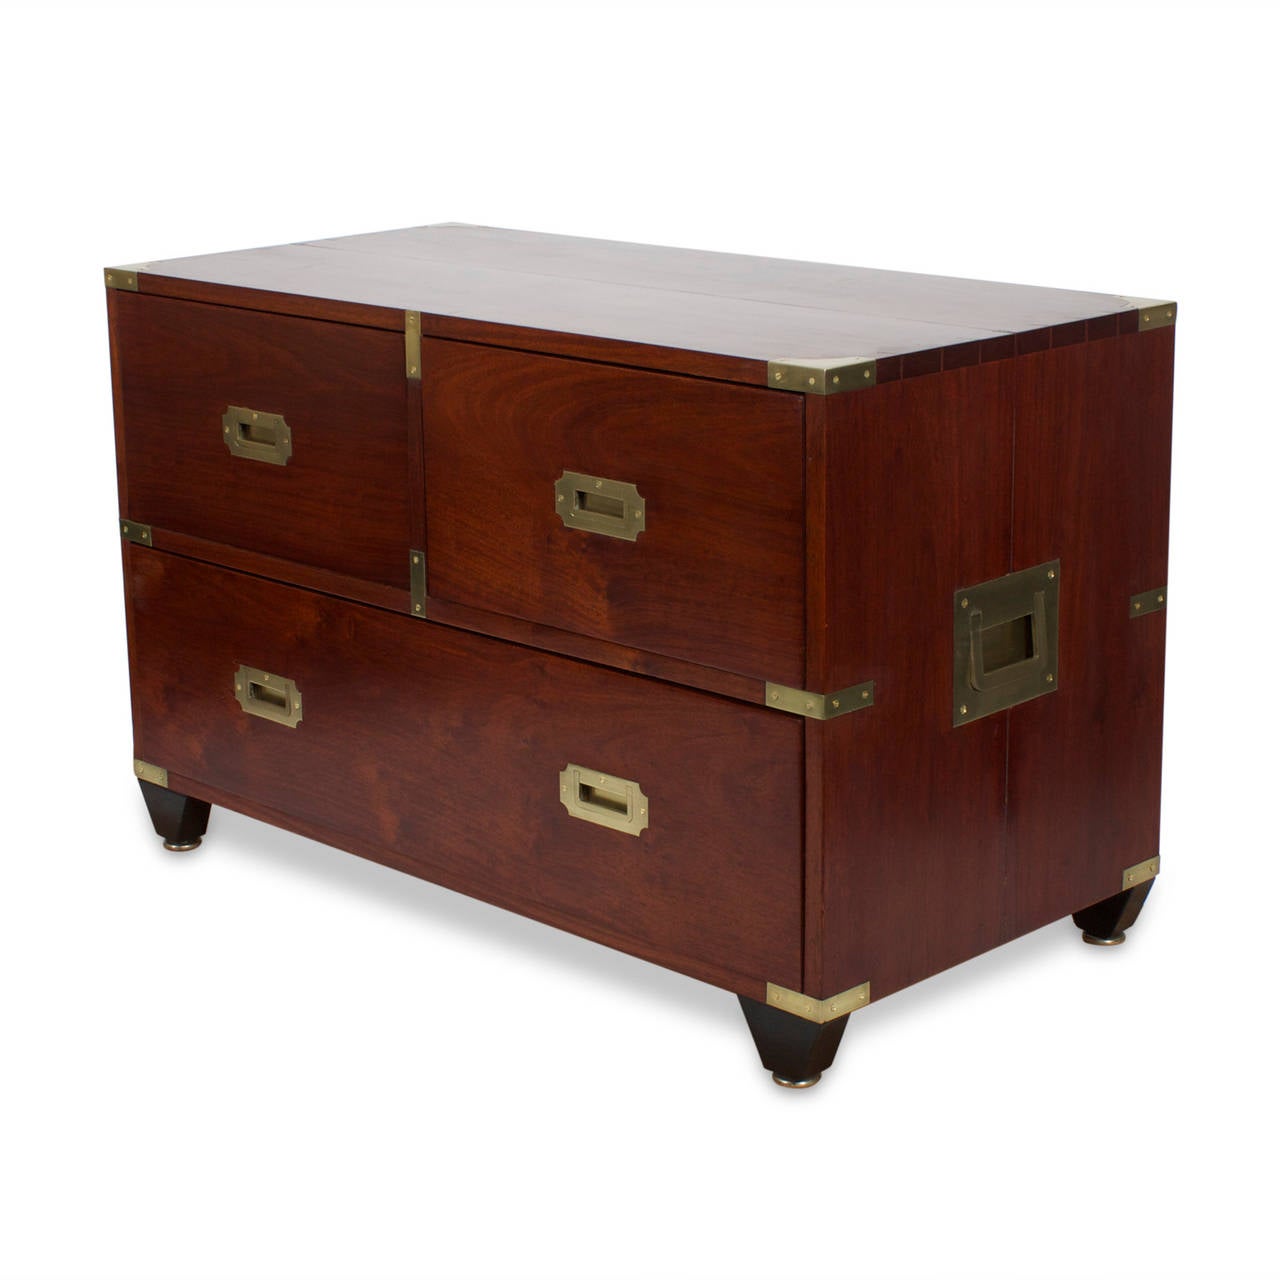 Charlotte Horstmann Campaign style chest made from in rich colored mahogany with ebonized tapered legs and Classic brass hardware. Labelled Charlotte Horstmann, Hong Kong. Newly polished.